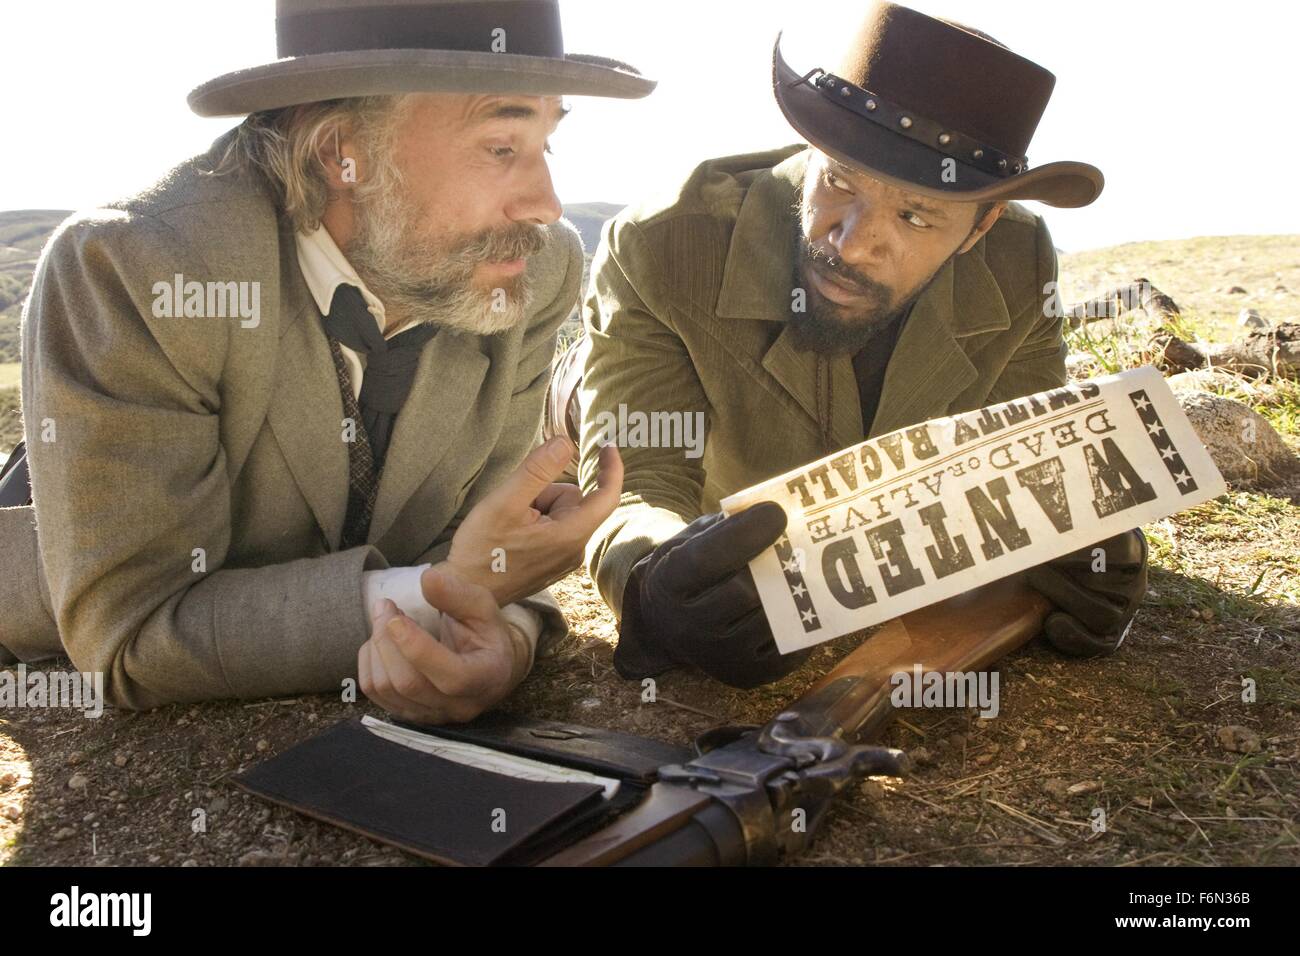 RELEASE DATE: December 25, 2012 MOVIE TITLE: Django Unchained STUDIO: Columbia Pictures DIRECTOR: Quentin Tarantino PLOT: With the help of his mentor, a slave-turned-bounty hunter sets out to rescue his wife from a brutal Mississippi plantation owner PICTURED: CHRISTOPH WALTZ as Dr. King Schultz and JAMIE FOXX as Django (Credit: c Columbia Pictures/Entertainment Pictures) Stock Photo